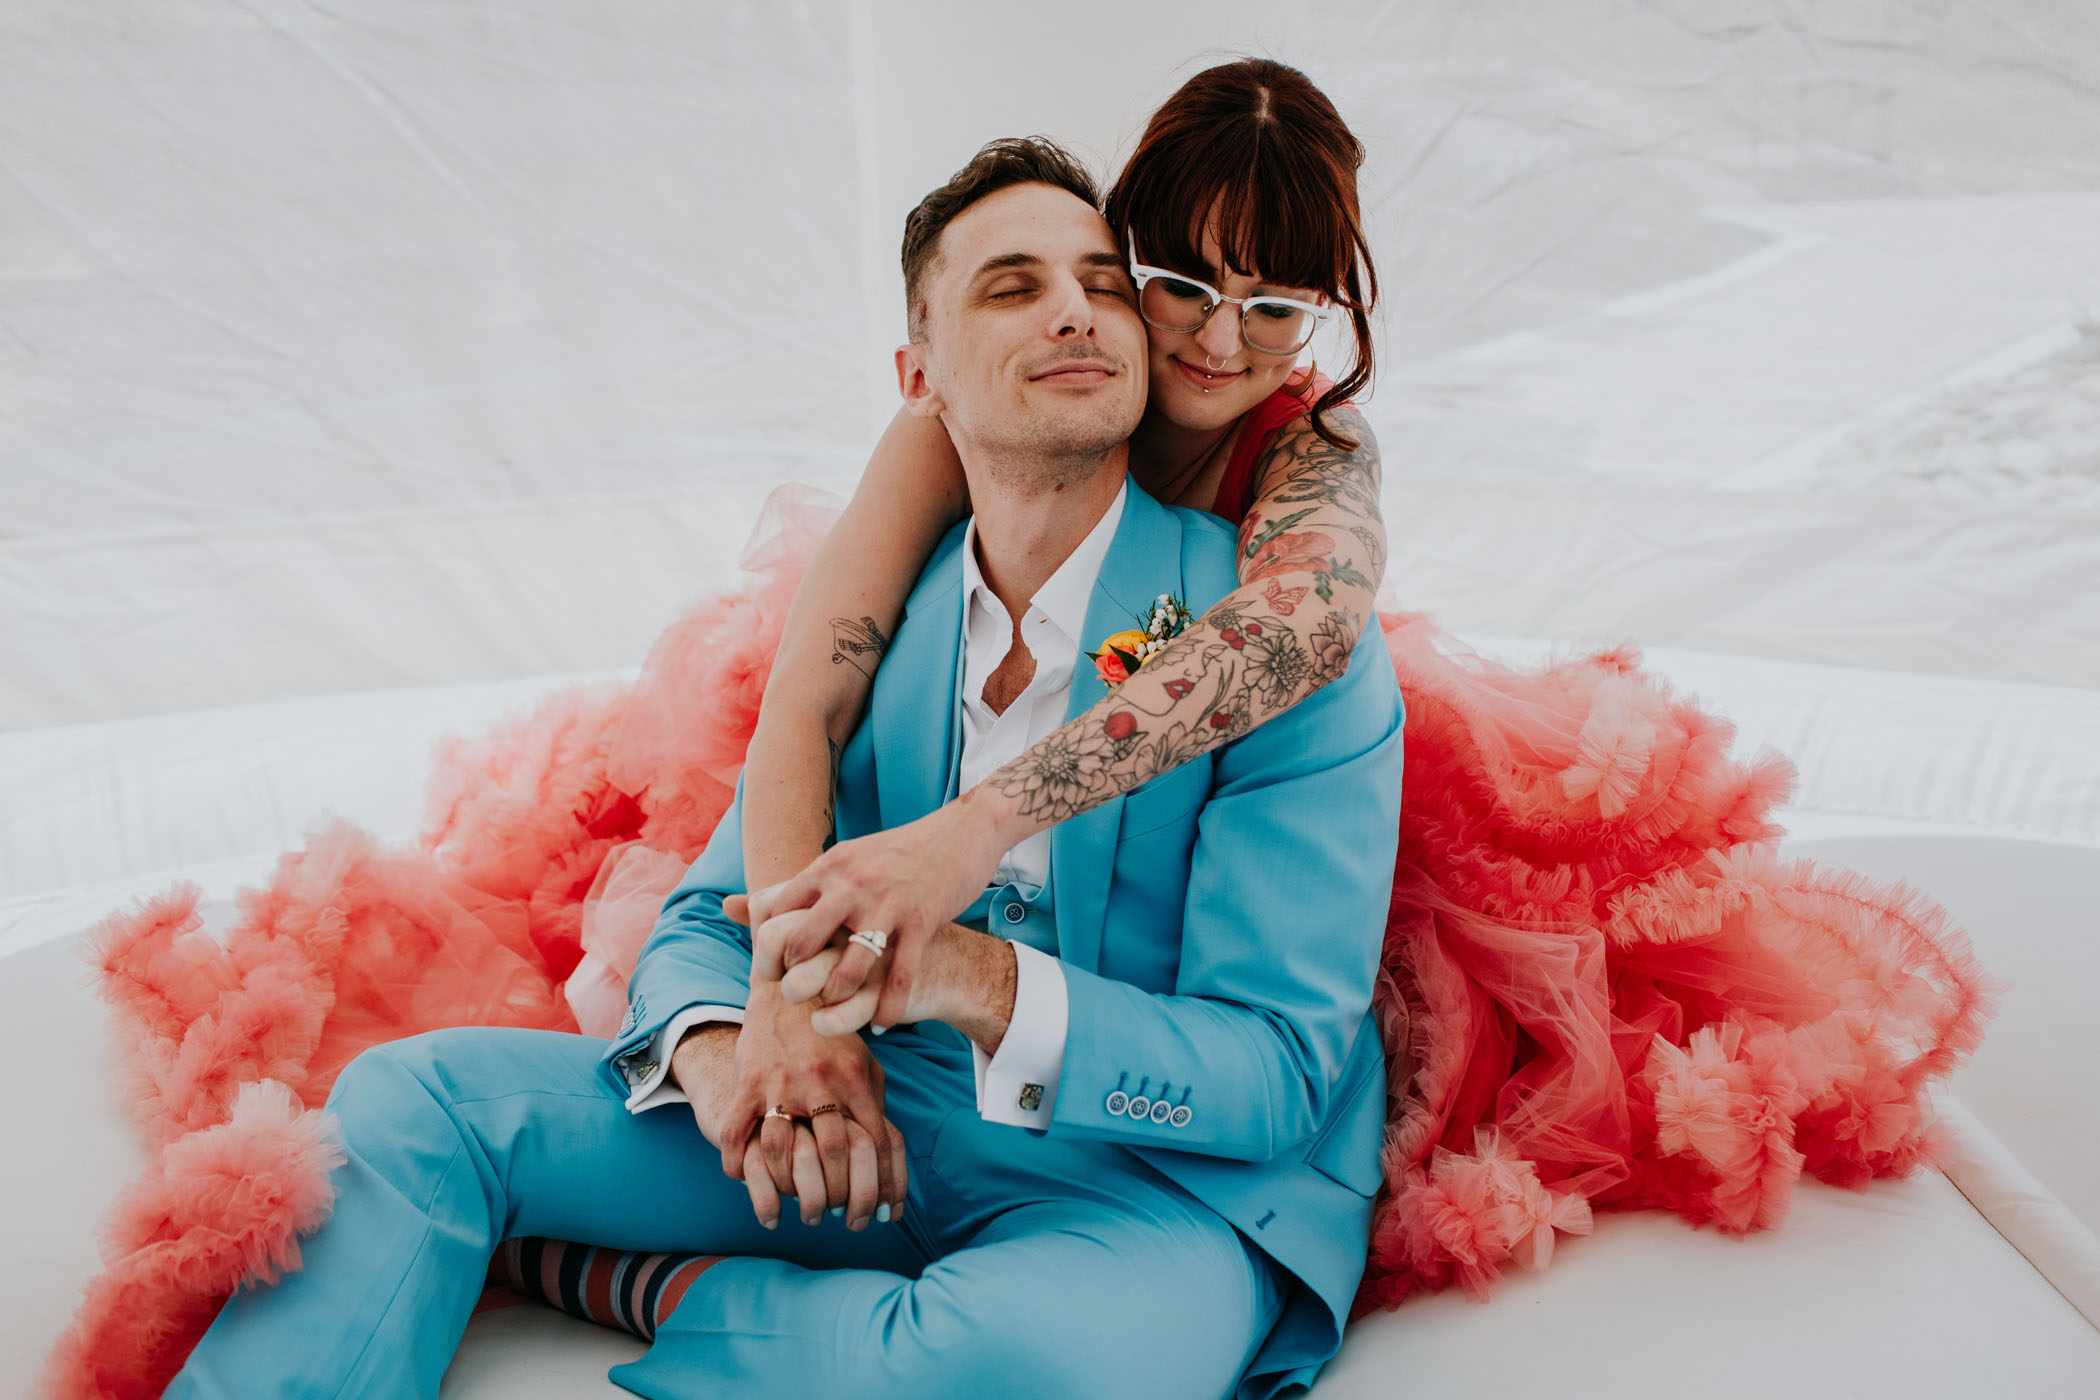 California Wedding With Cotton Candy Colors and a Bounce House